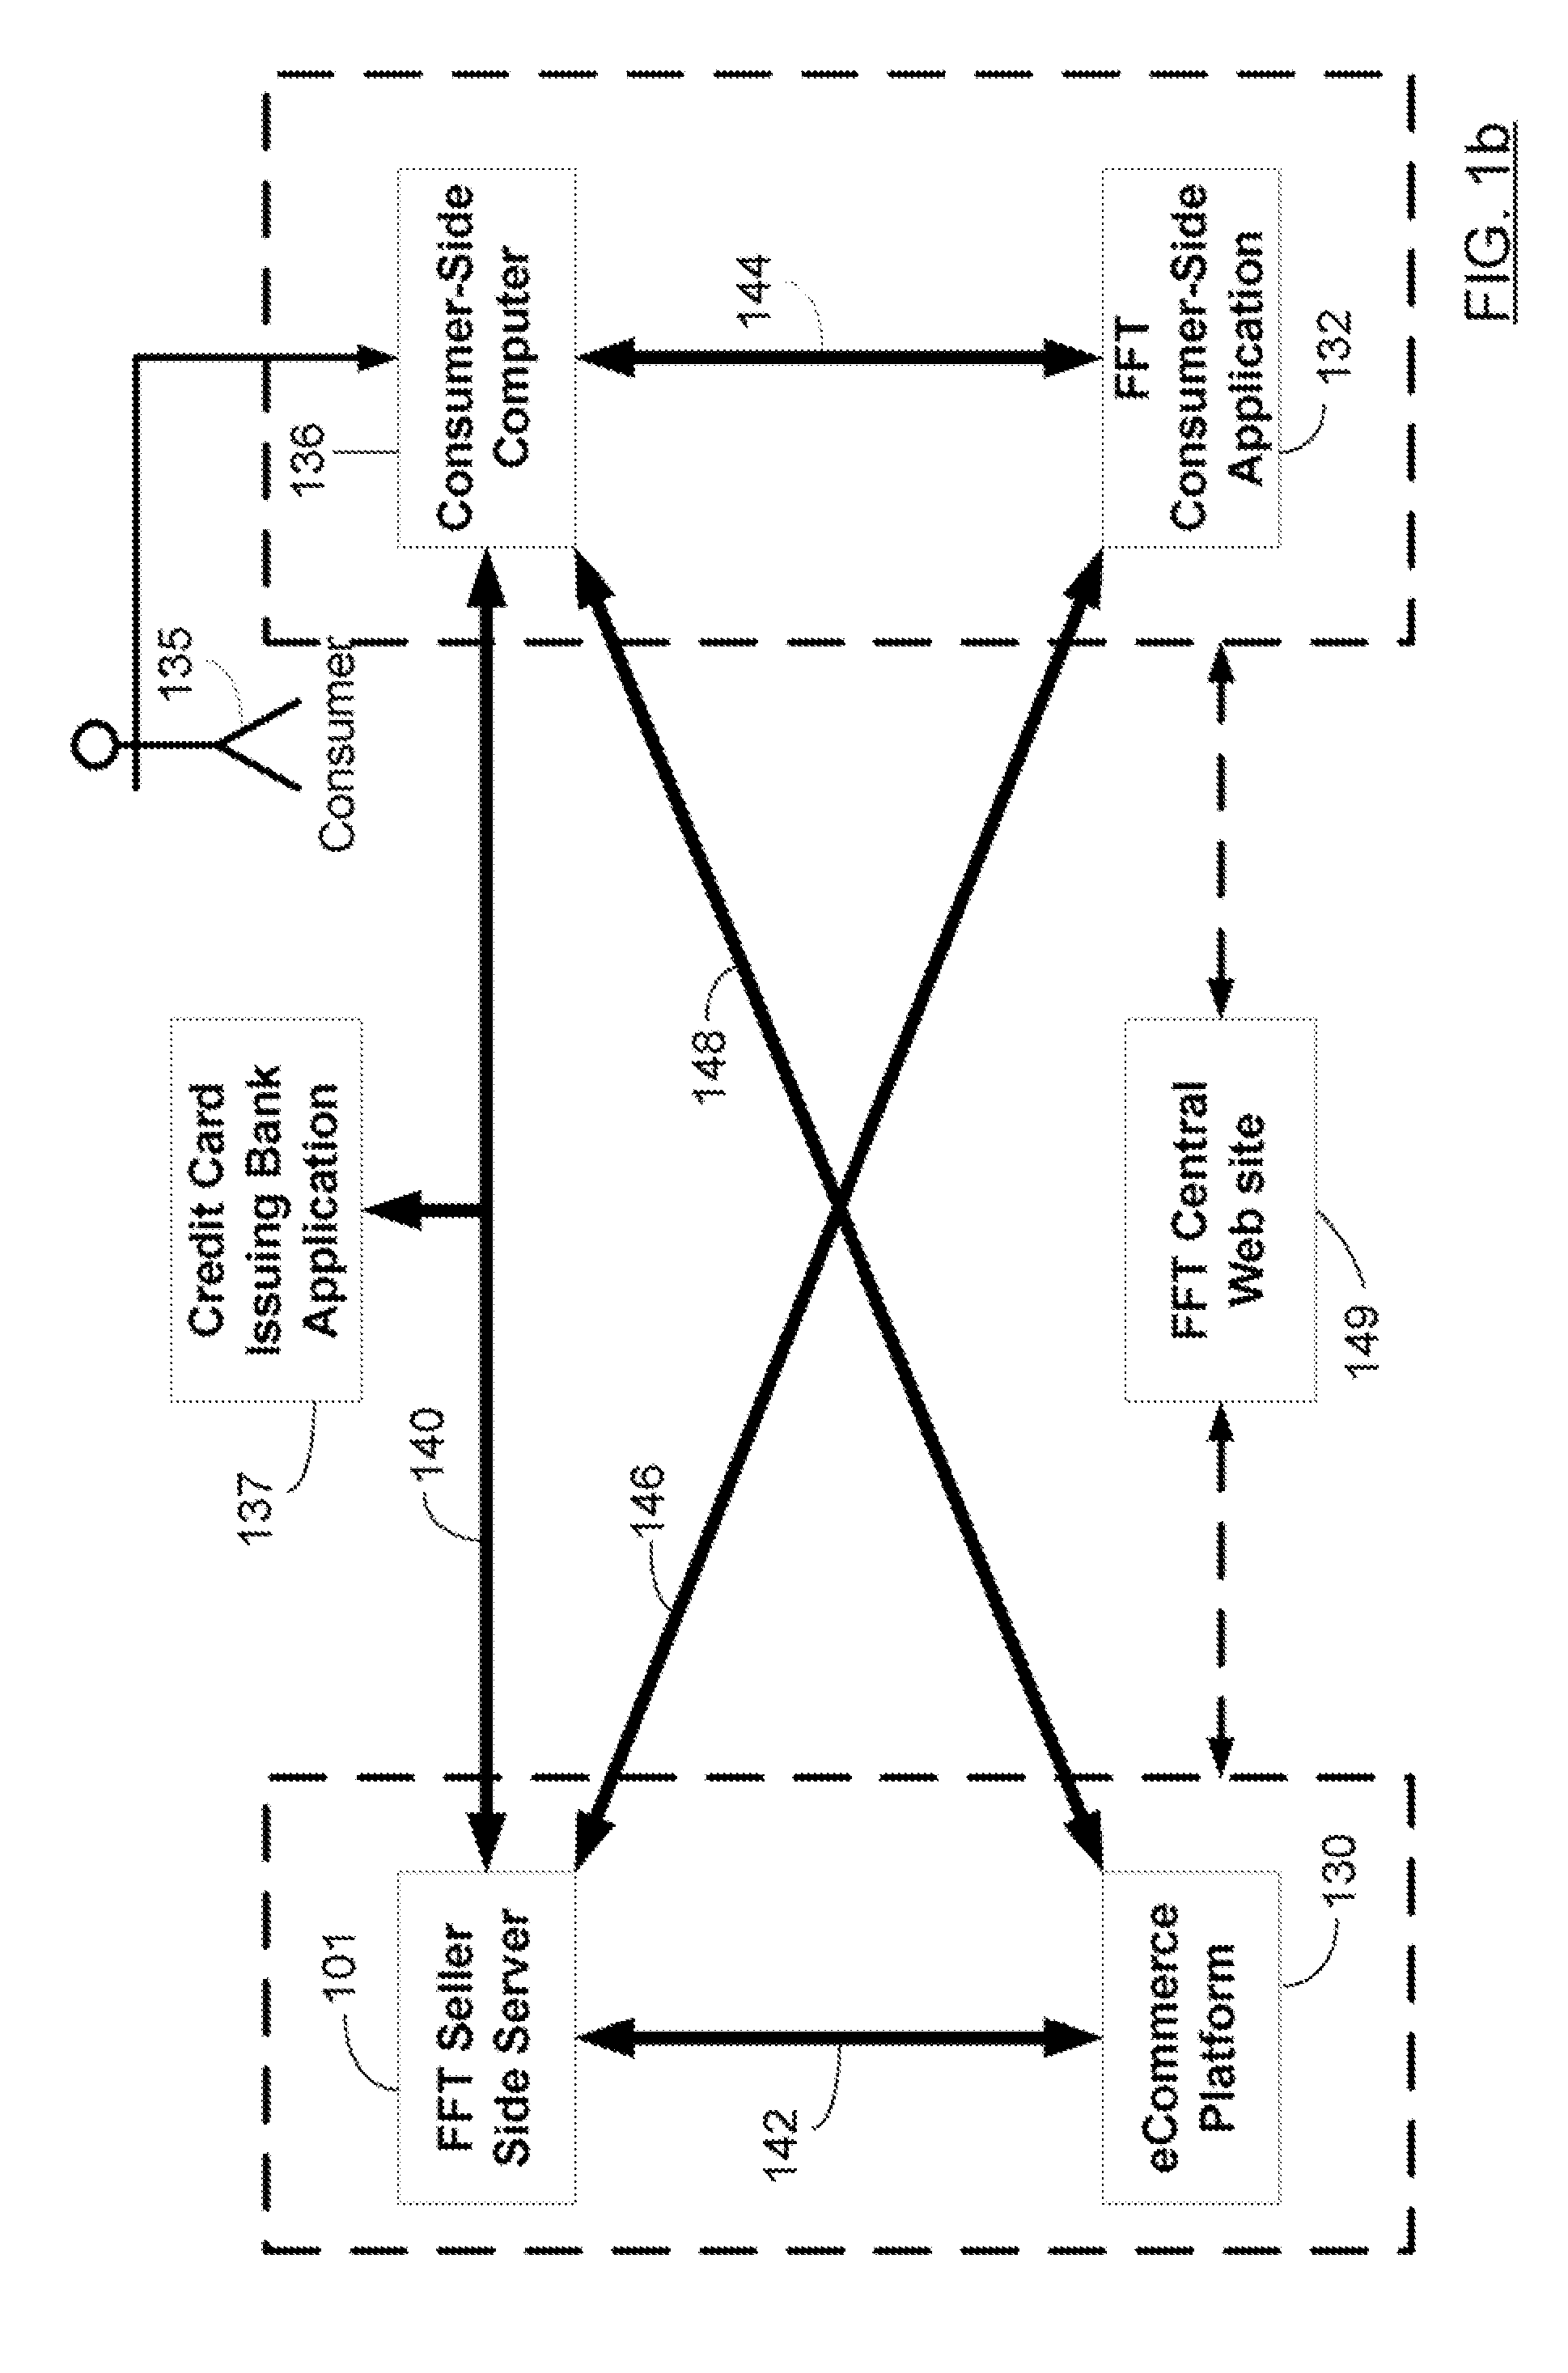 Systems and Methods for Automatic and Transparent Client Authentication and Online Transaction Verification